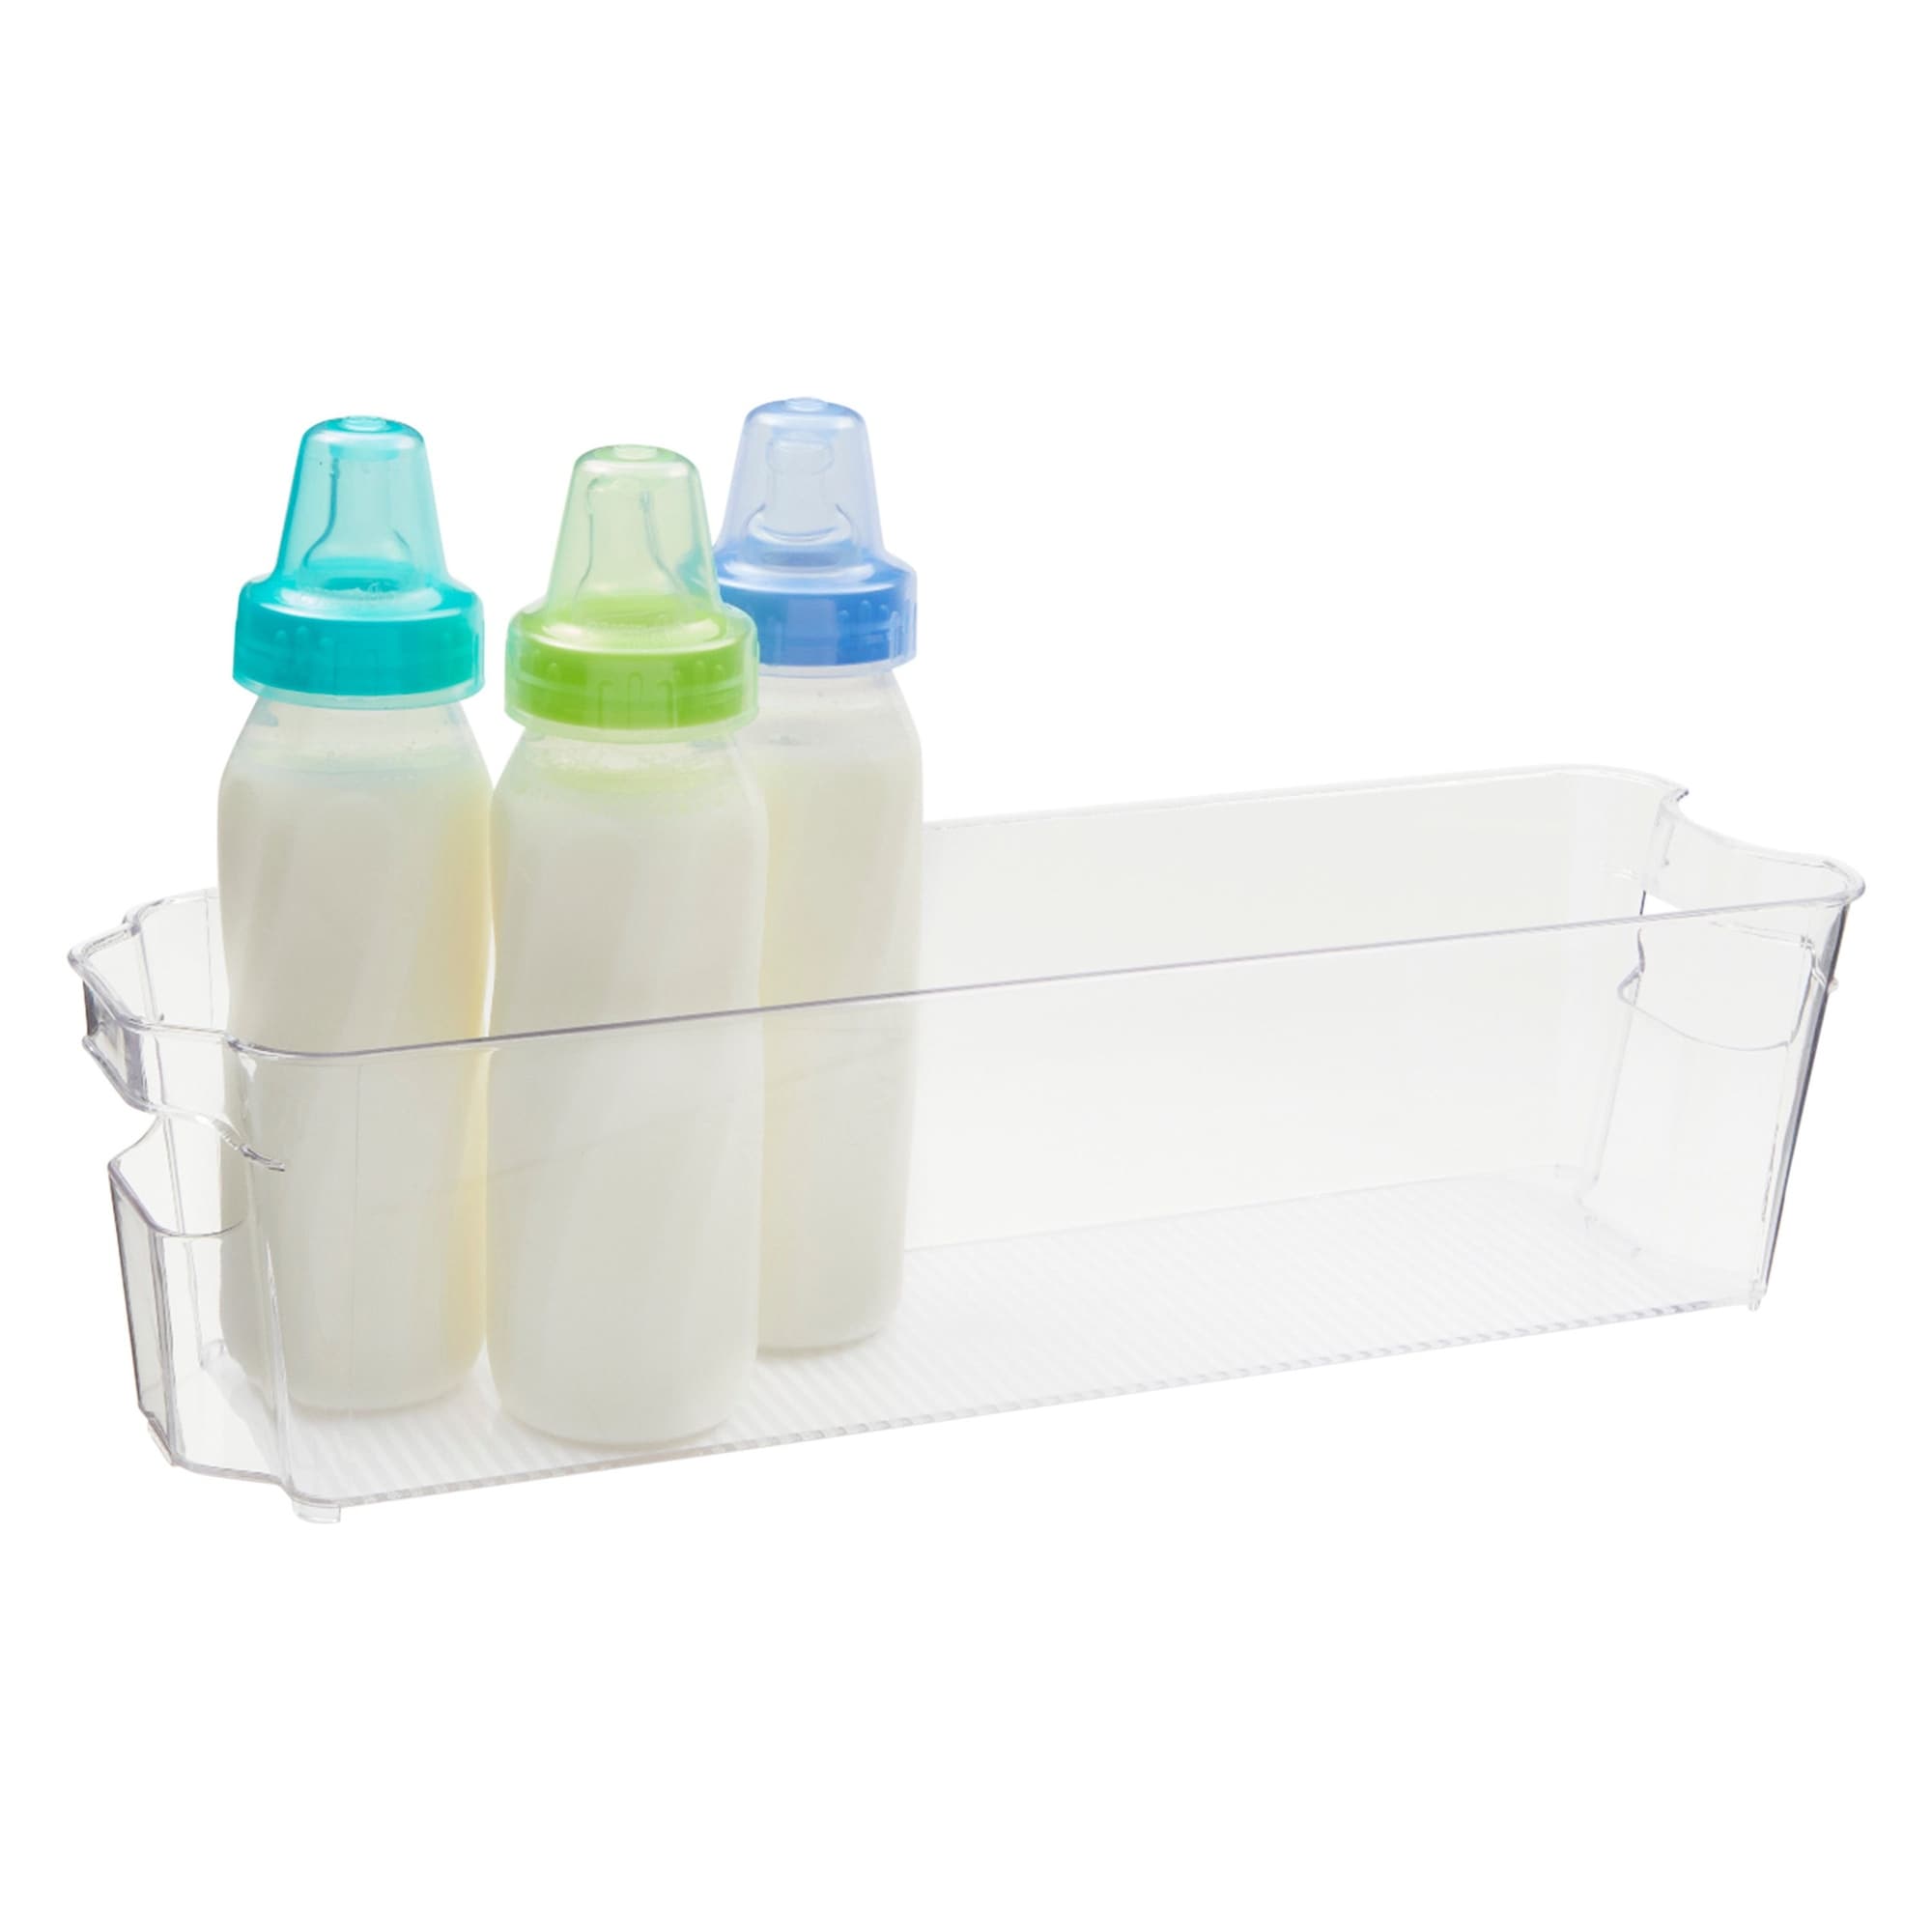 https://ak1.ostkcdn.com/images/products/is/images/direct/3717468f619f38df92376e2b165c9a84ce23731f/Clear-Plastic-Freezer-Organizers%2C-Breastmilk-Storage-Containers-%2814.5-x-4-x-3.75-In%2C-2-Pack%29.jpg